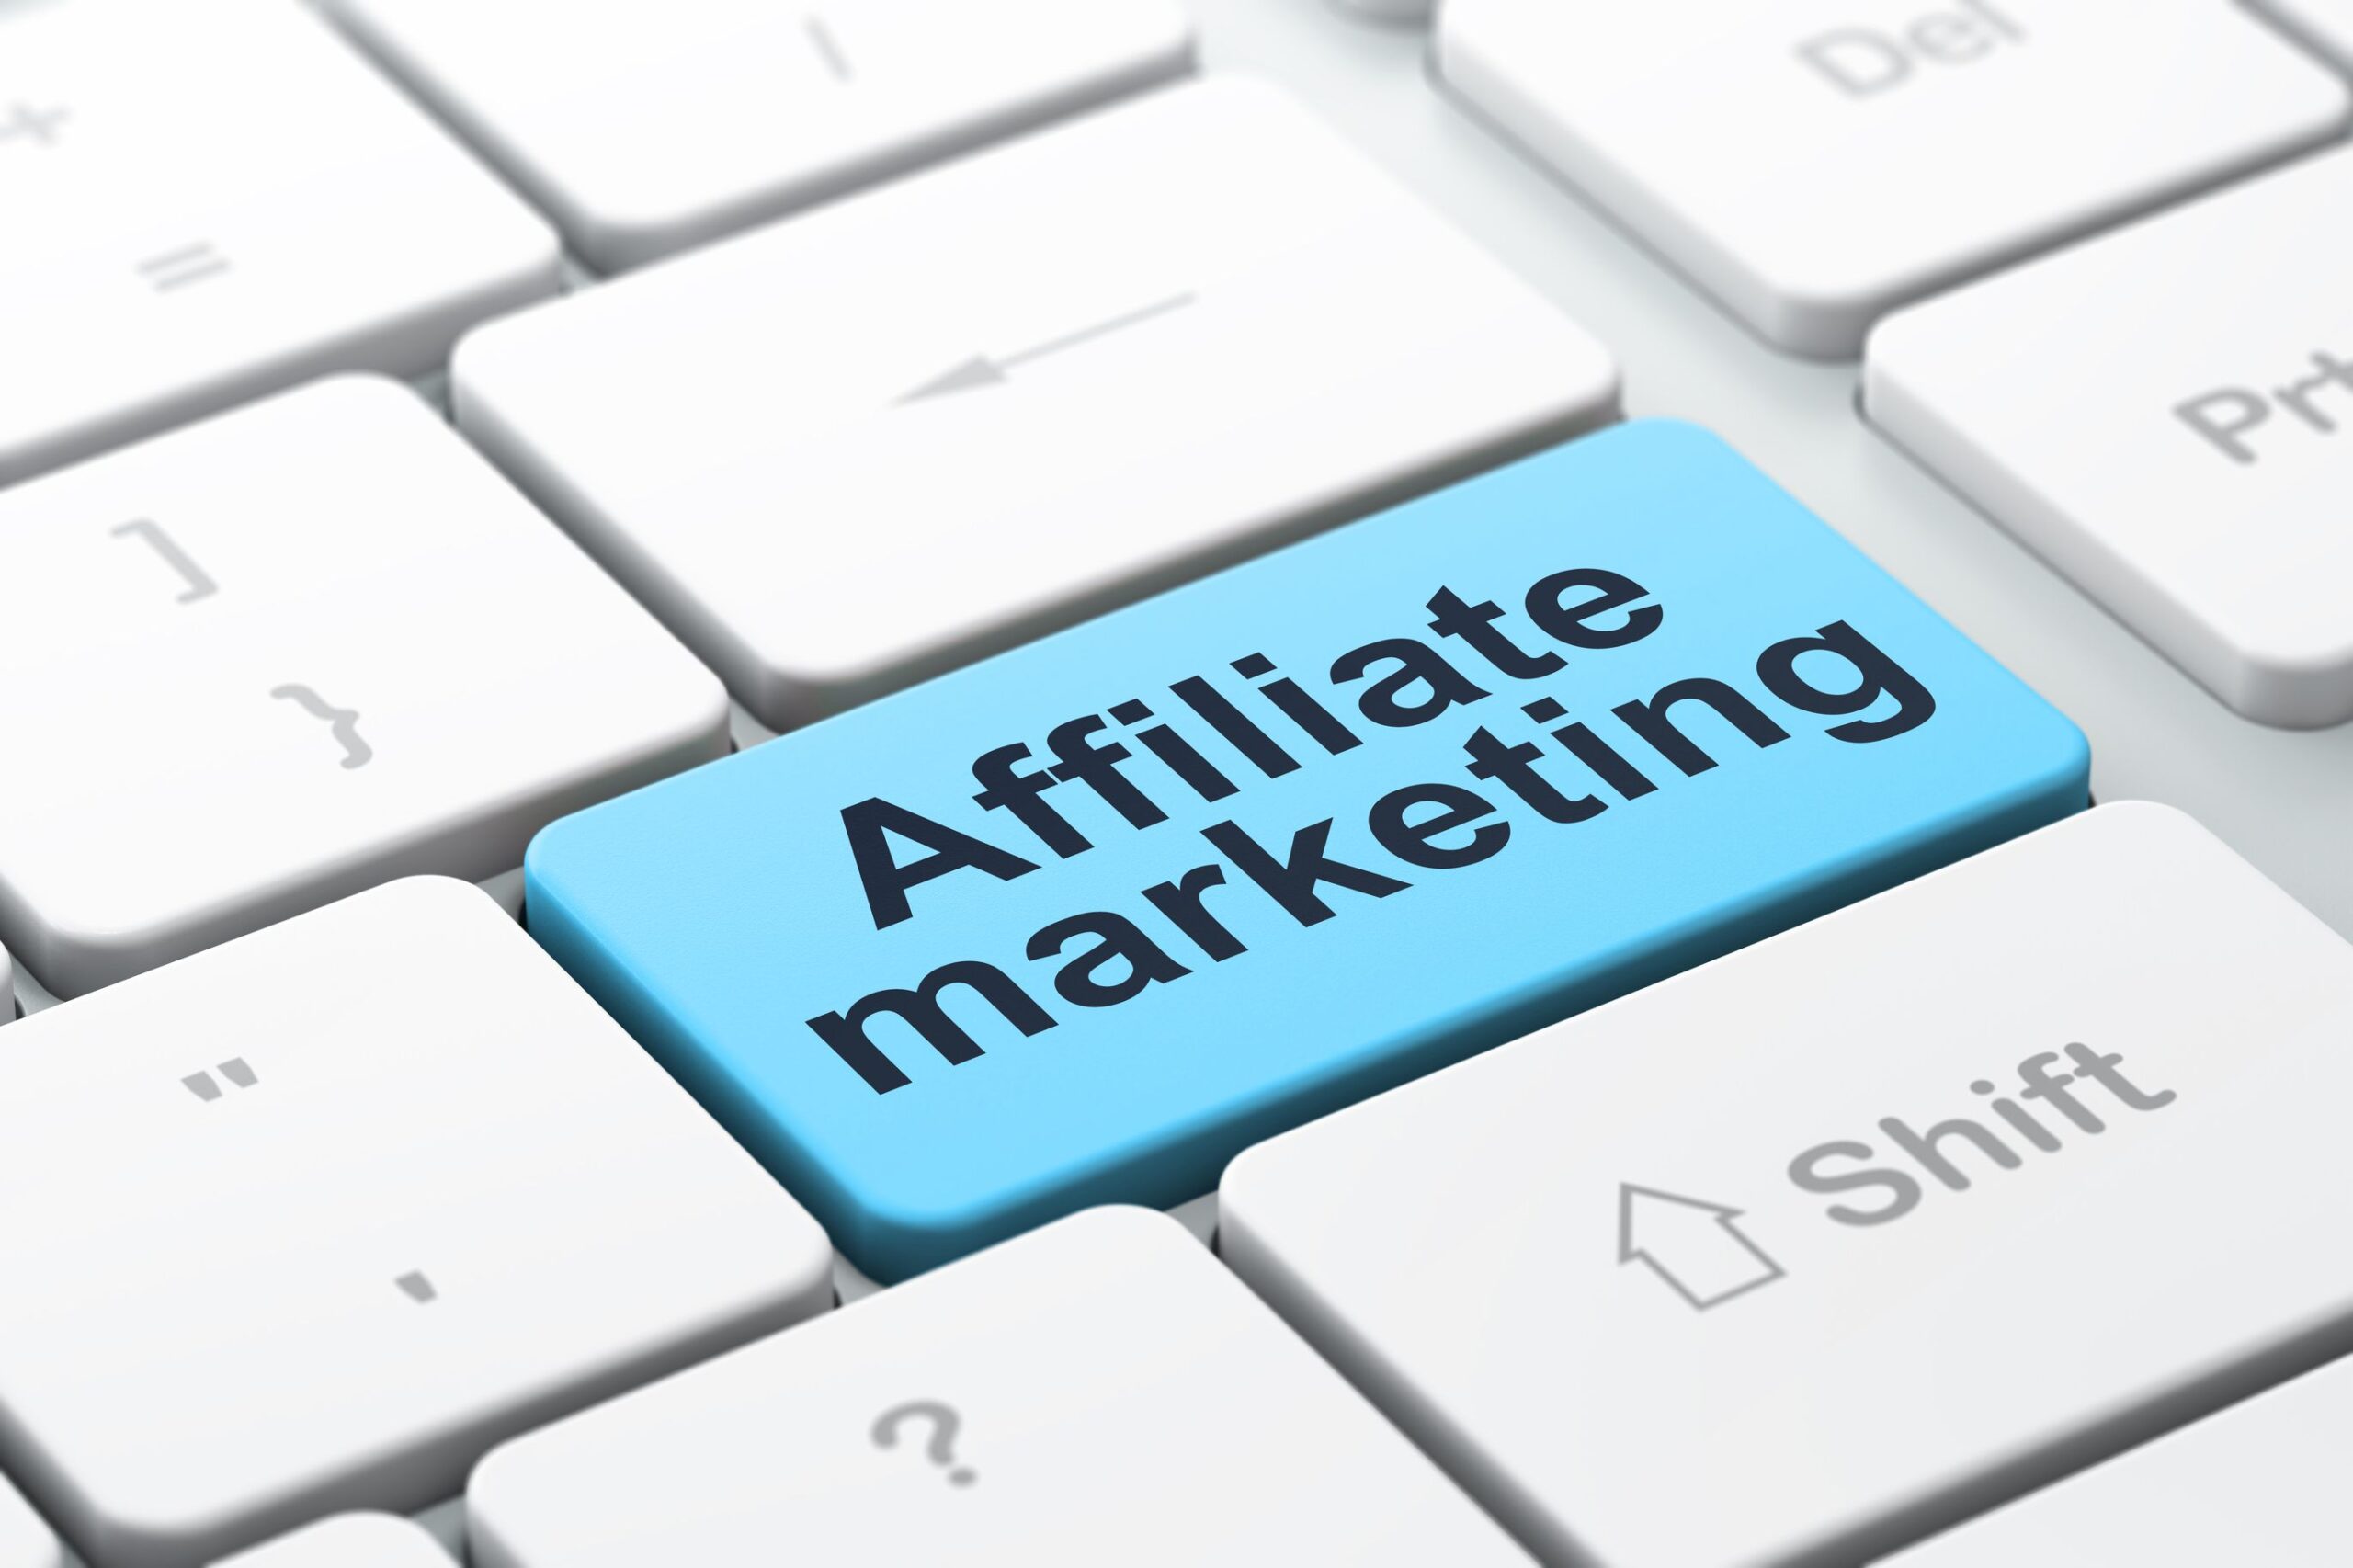 How to Maximize Earnings with Affiliate Marketing, Top Tips 4 U